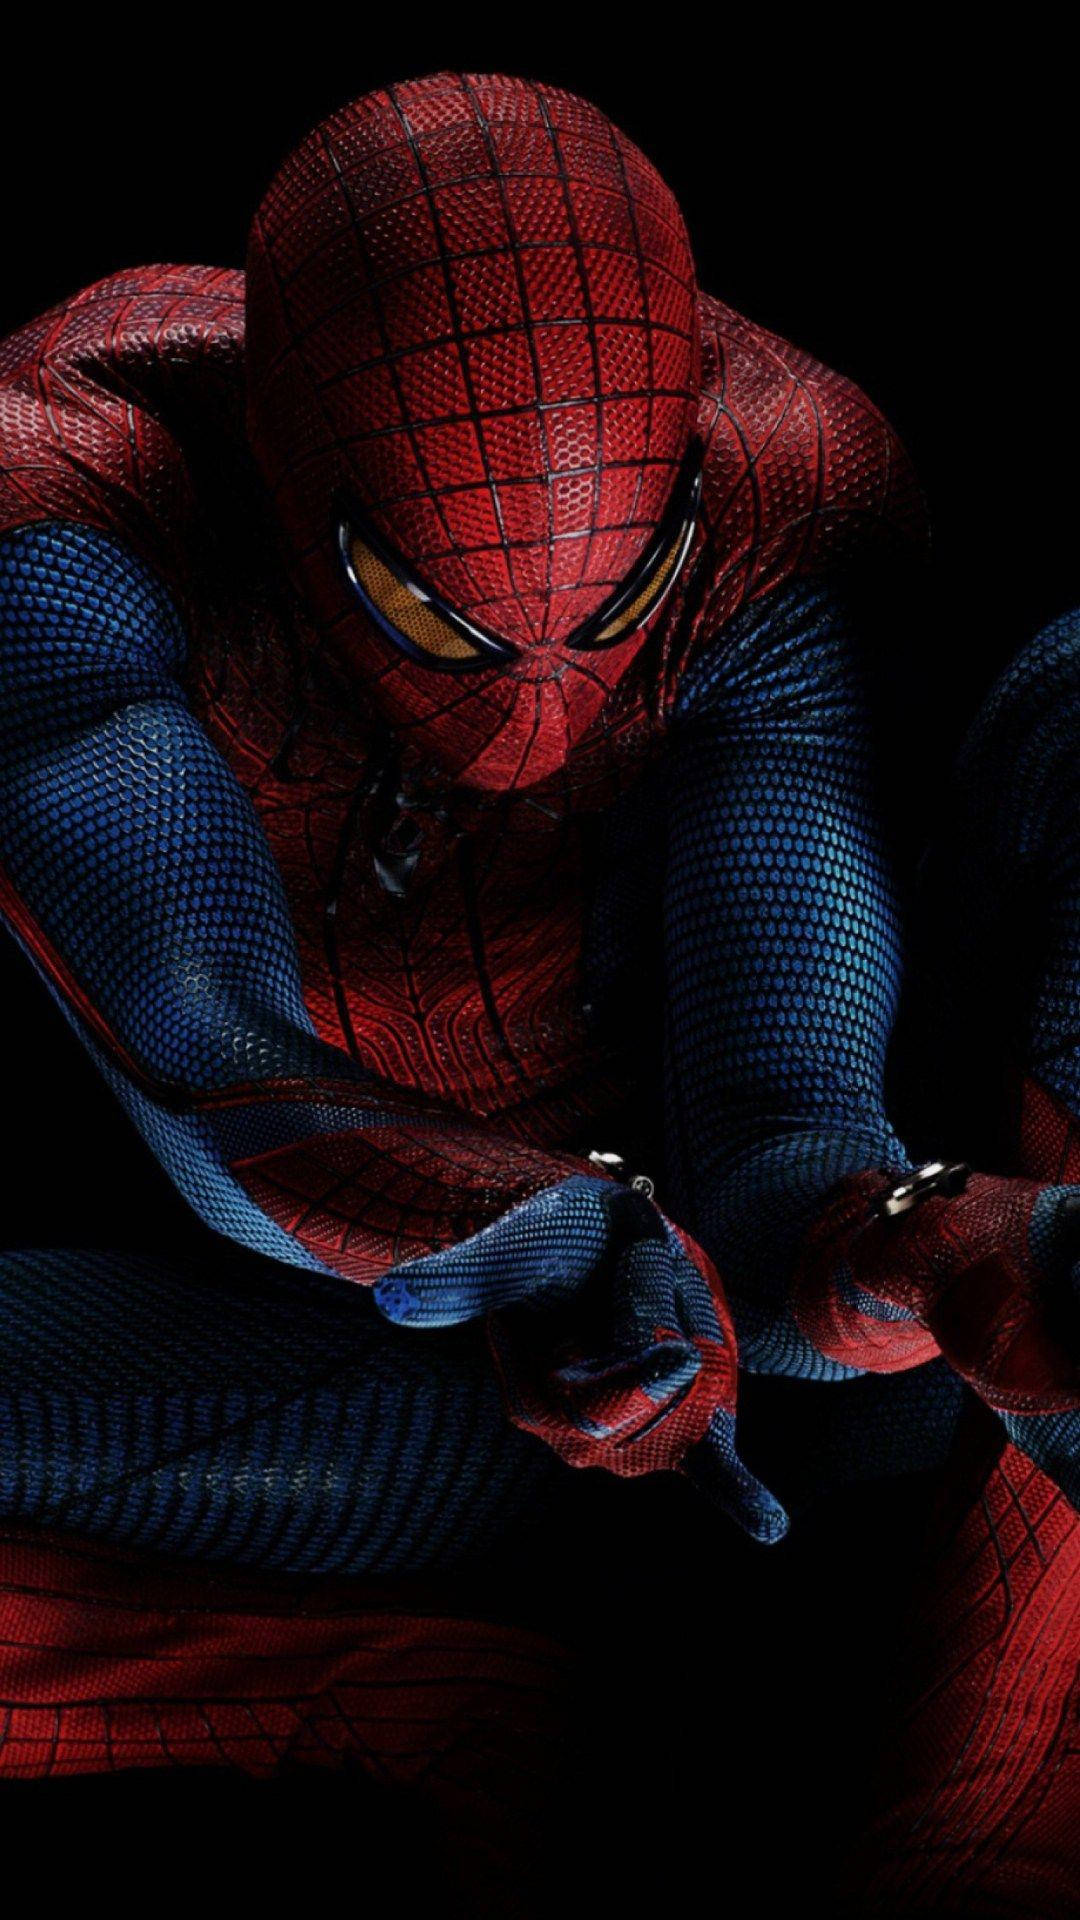 iPhone Wallpapers for iPhone 12 iPhone 11 iPhone X iPhone XR iPhone 8  Plus High Quality Wallpape  Spiderman artwork Marvel spiderman art  Superhero wallpaper